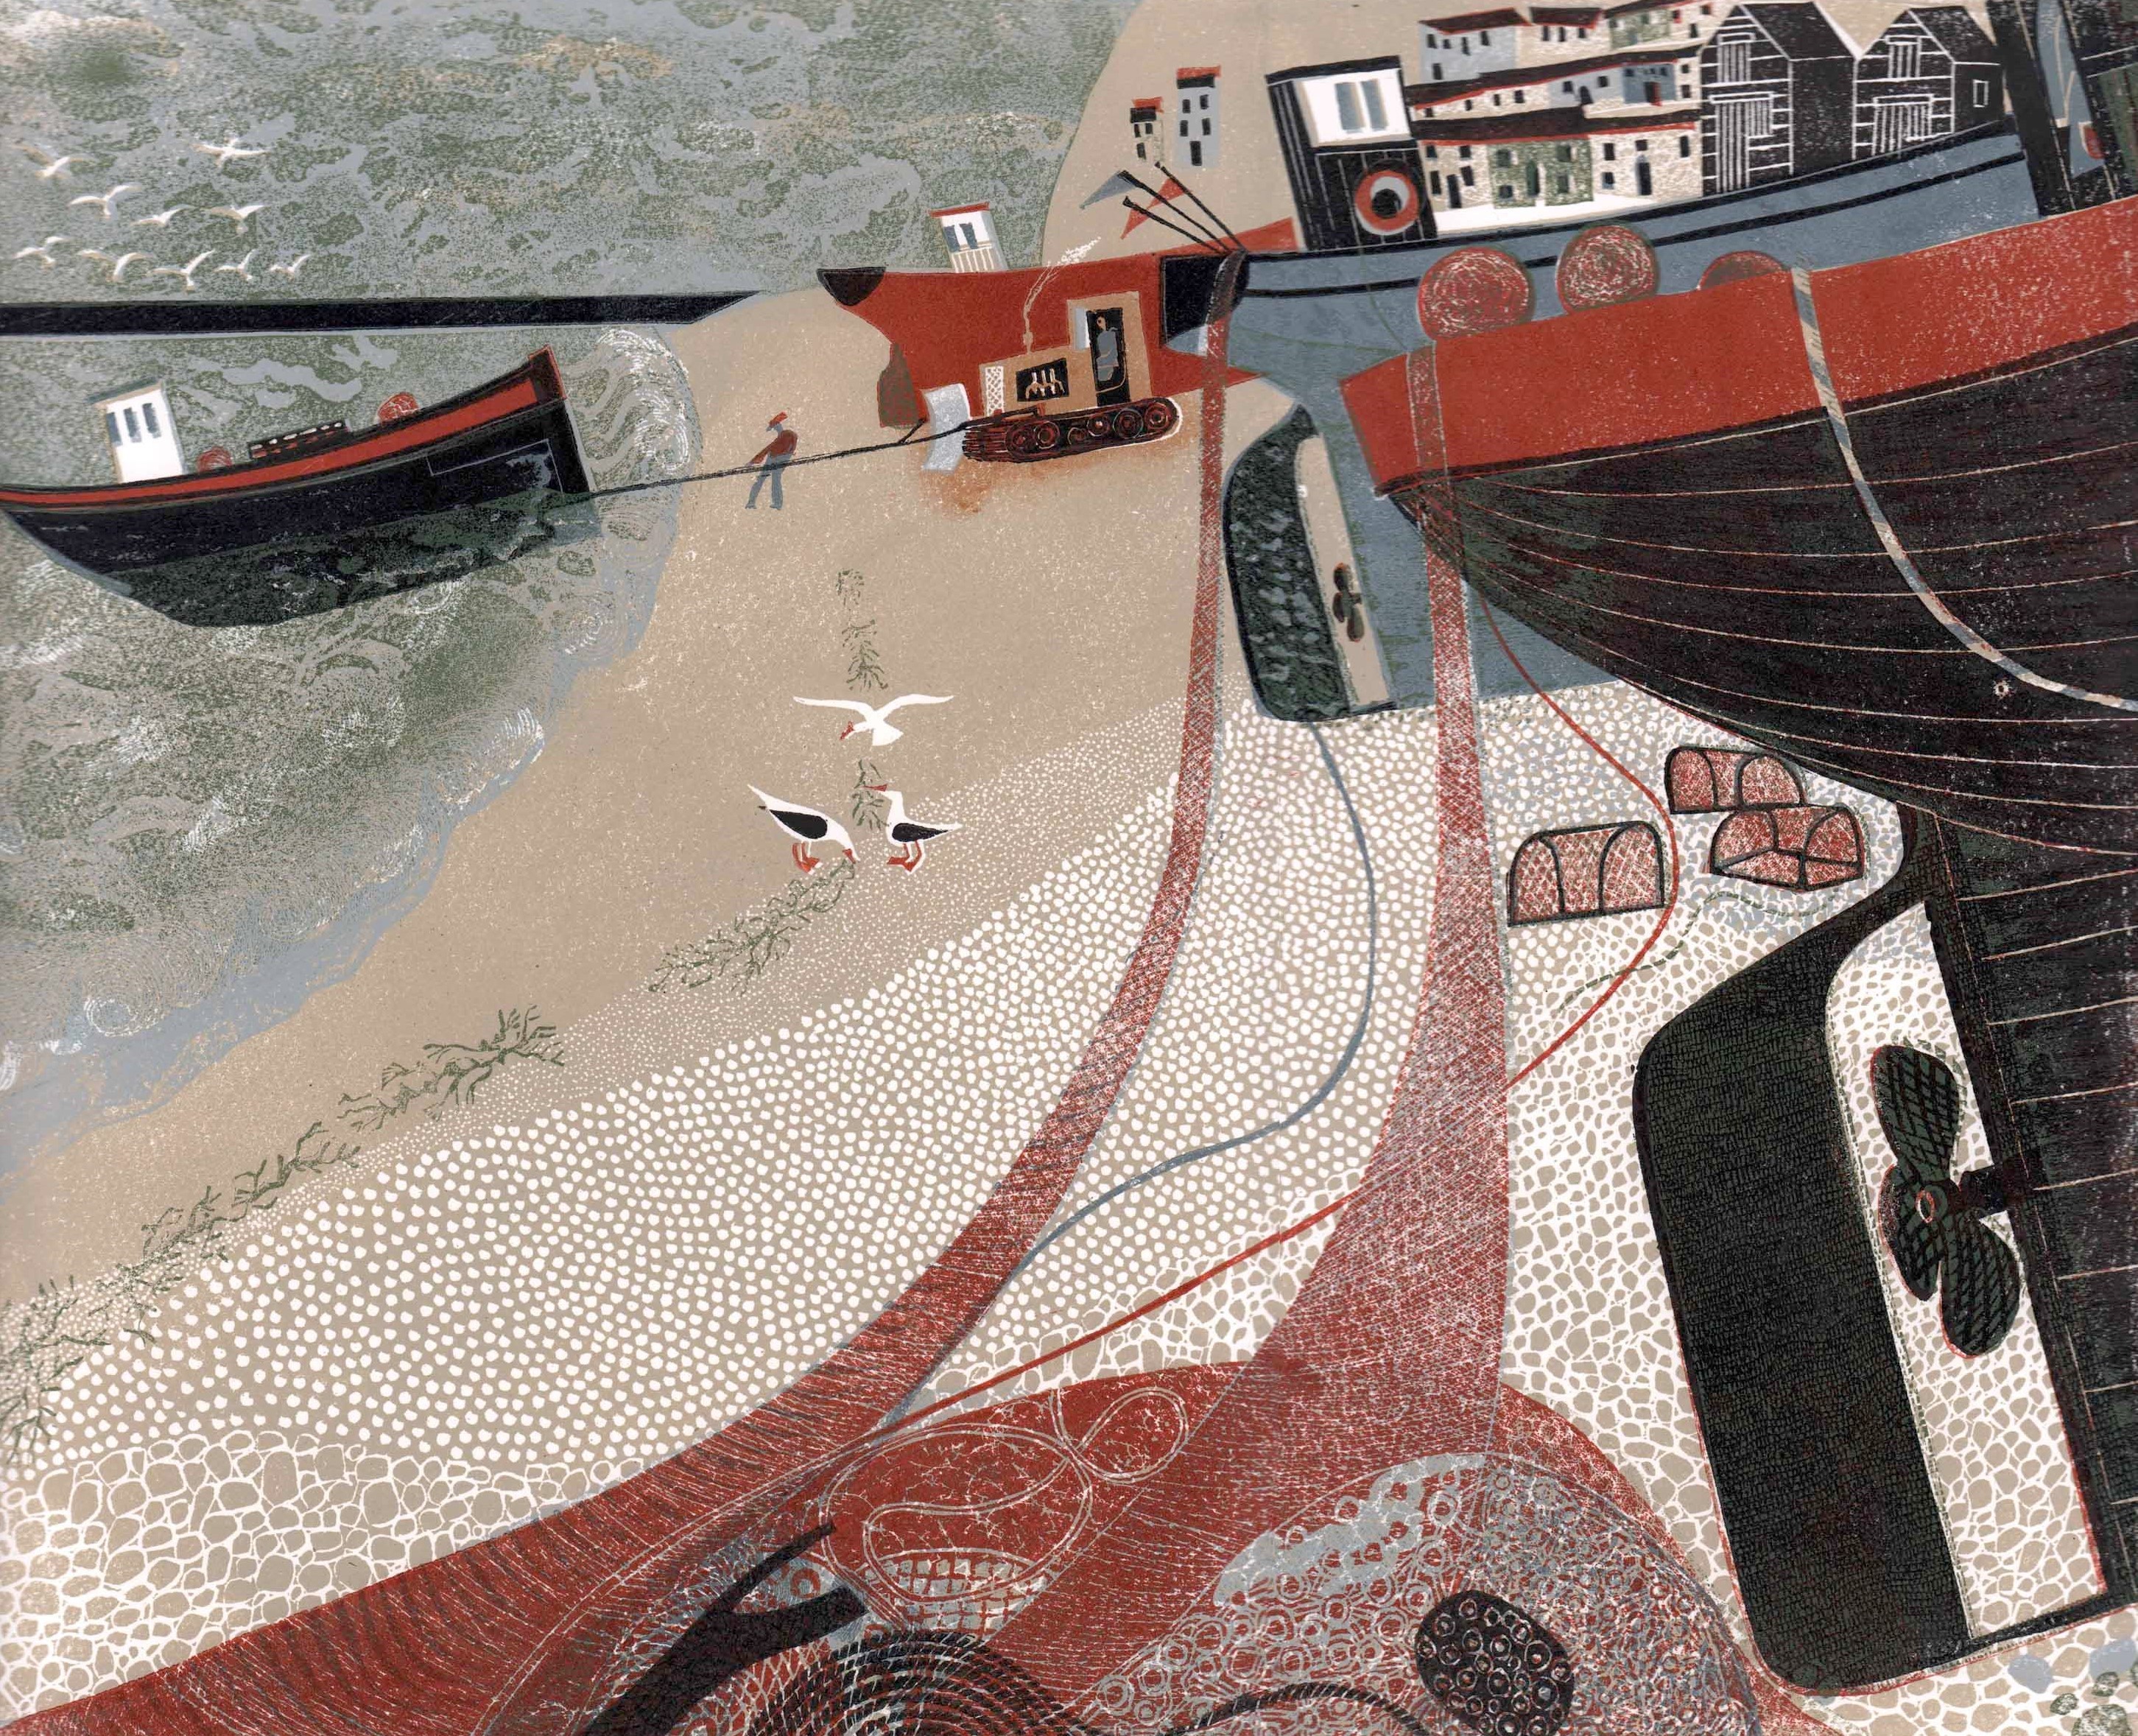 https://theauctioncollective.com/media/1125/melvyn-evans-the-fishing-boats-on-hastings-beach-the-auction-collective.jpg